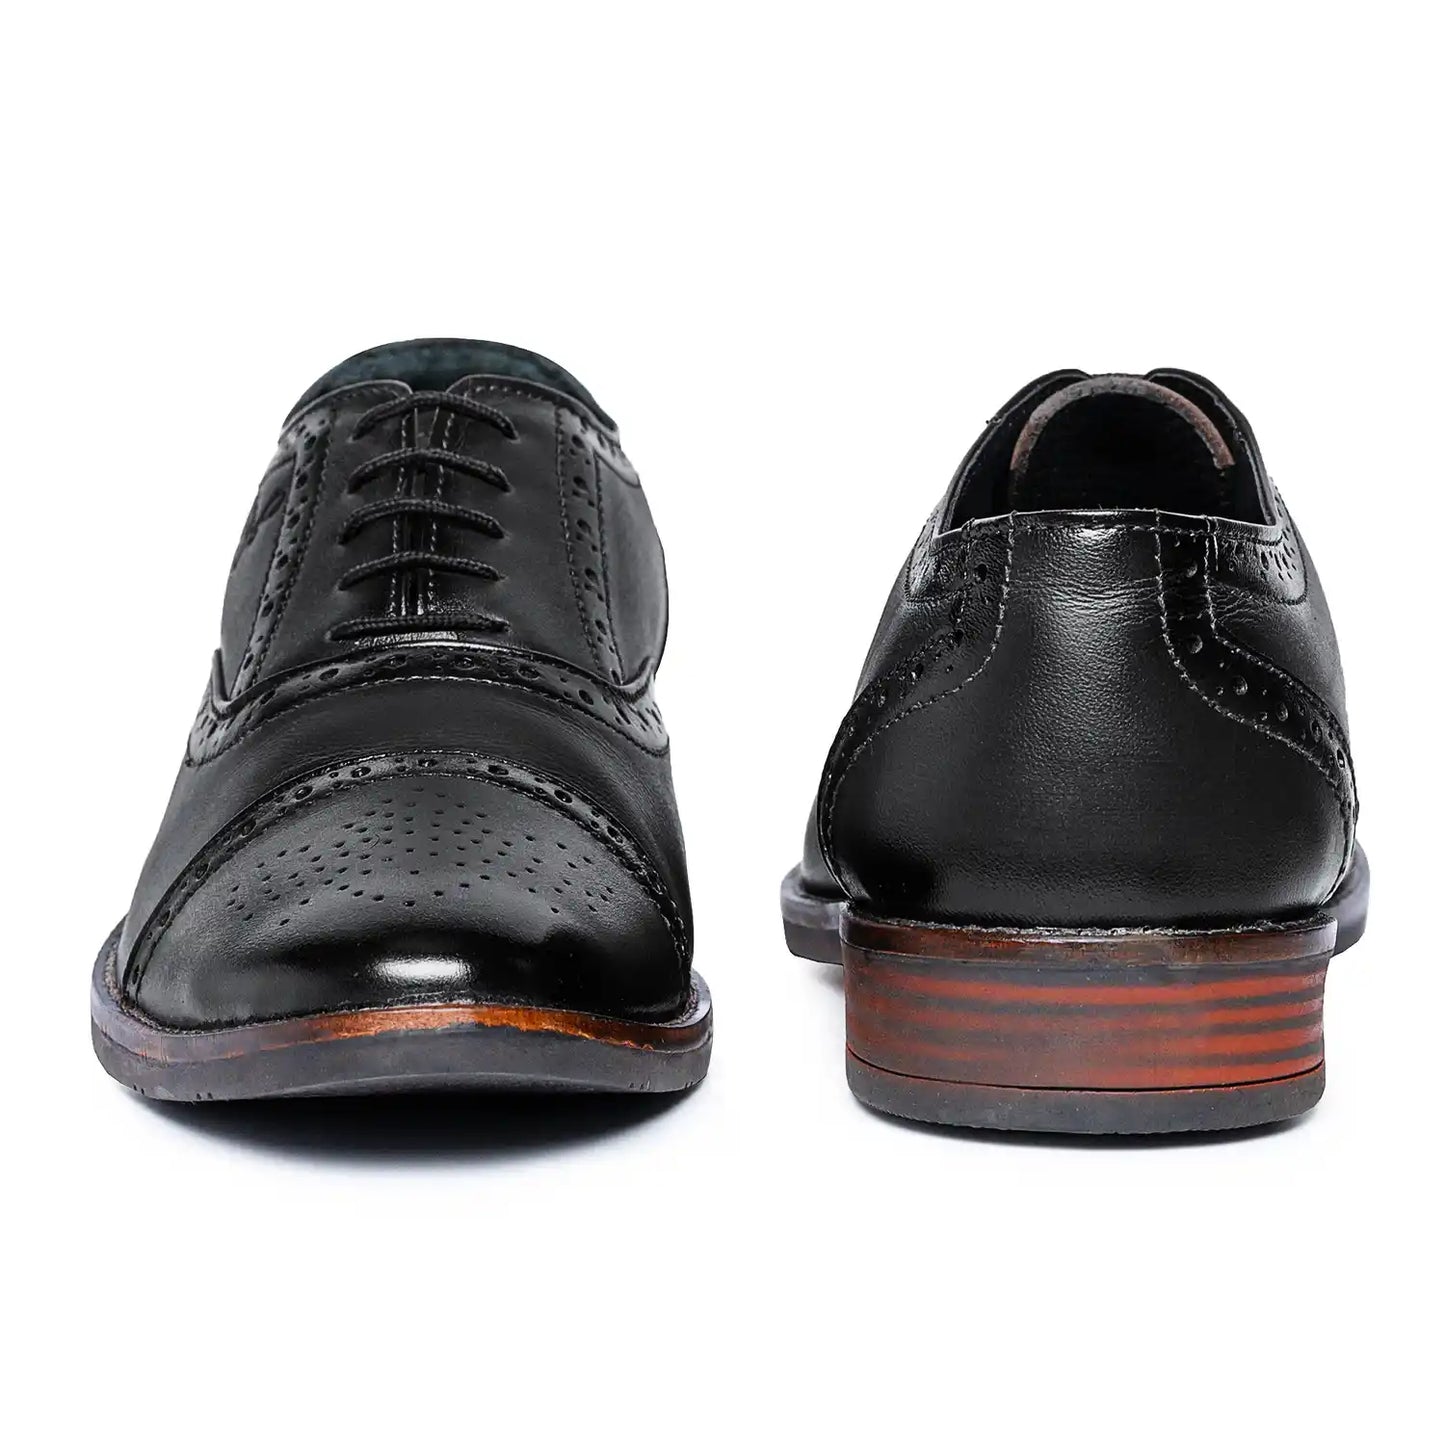 Genuine Leather Brogues for Men